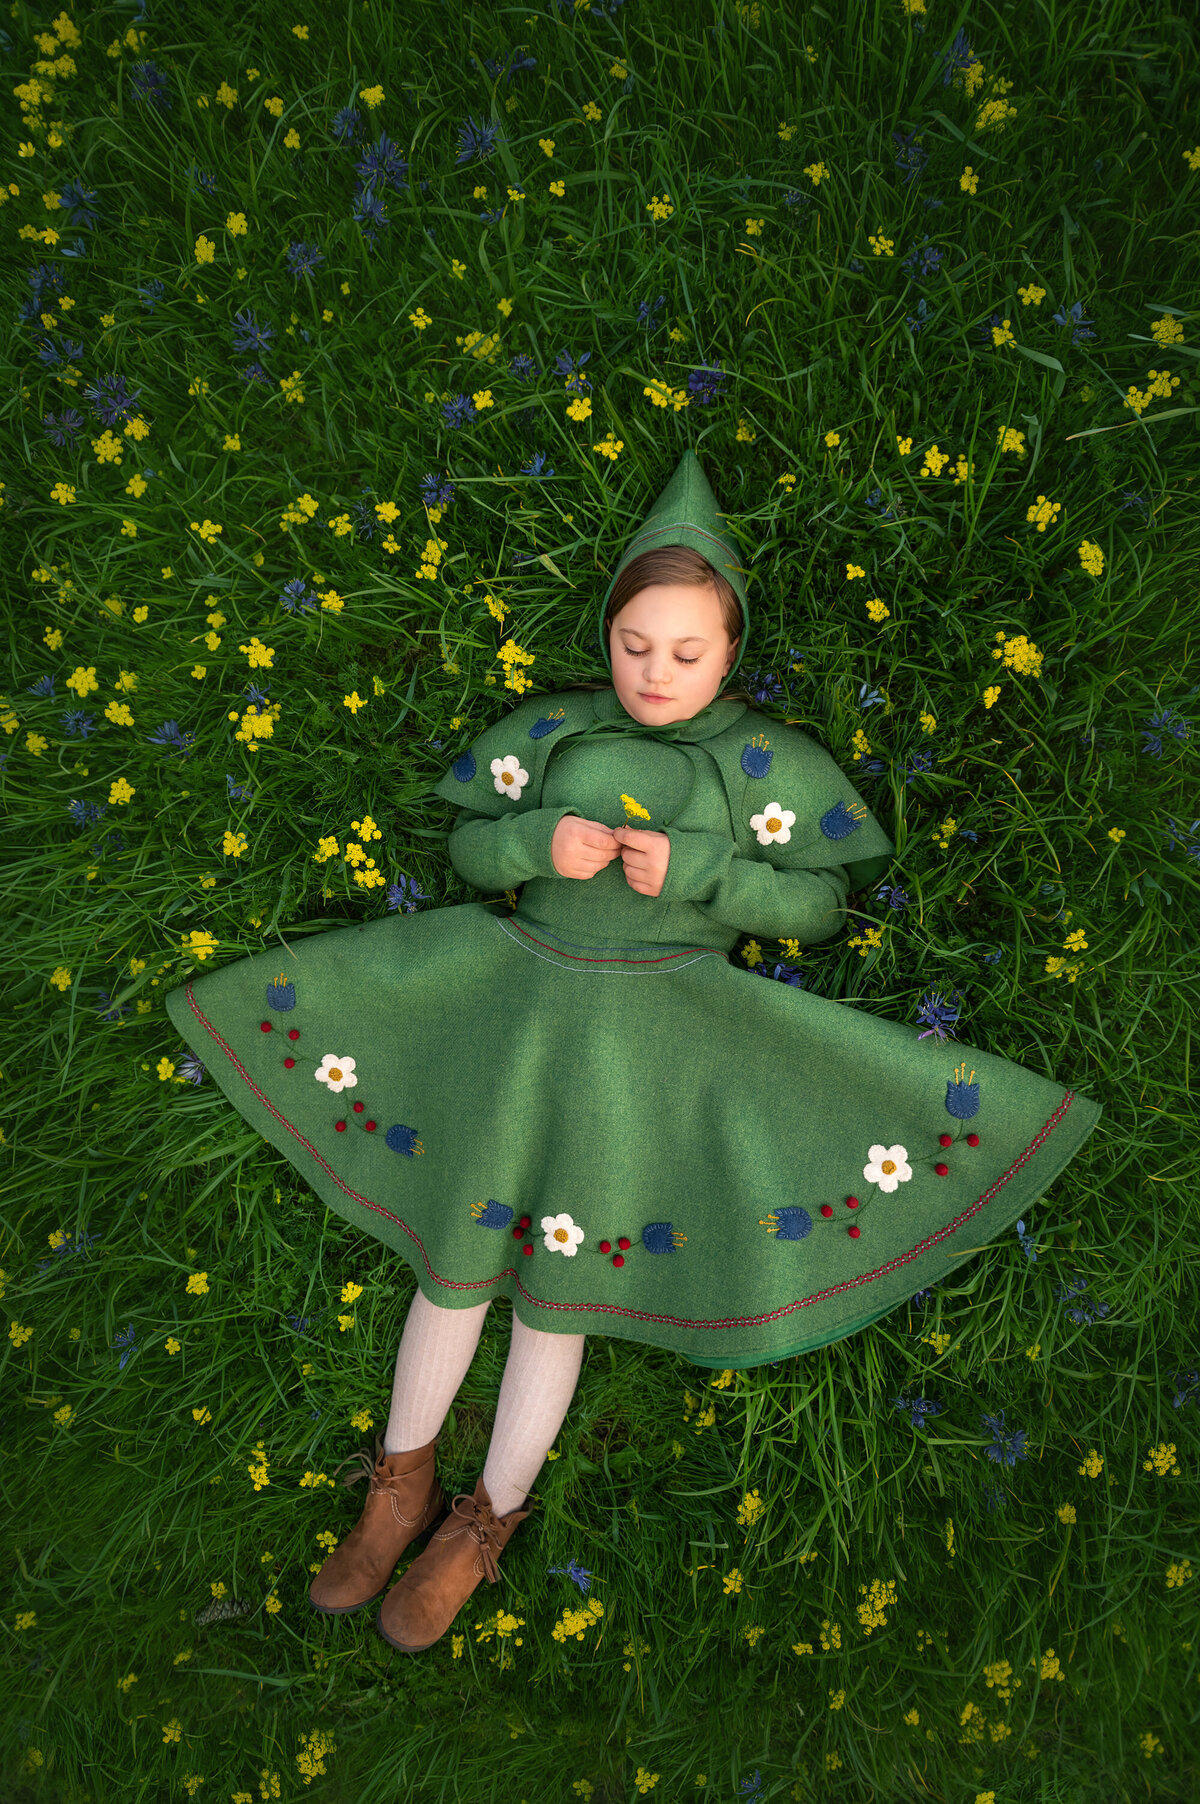 A girl lays flat on her back in a field of yellow flowers wearing gnome-inspired costuming.